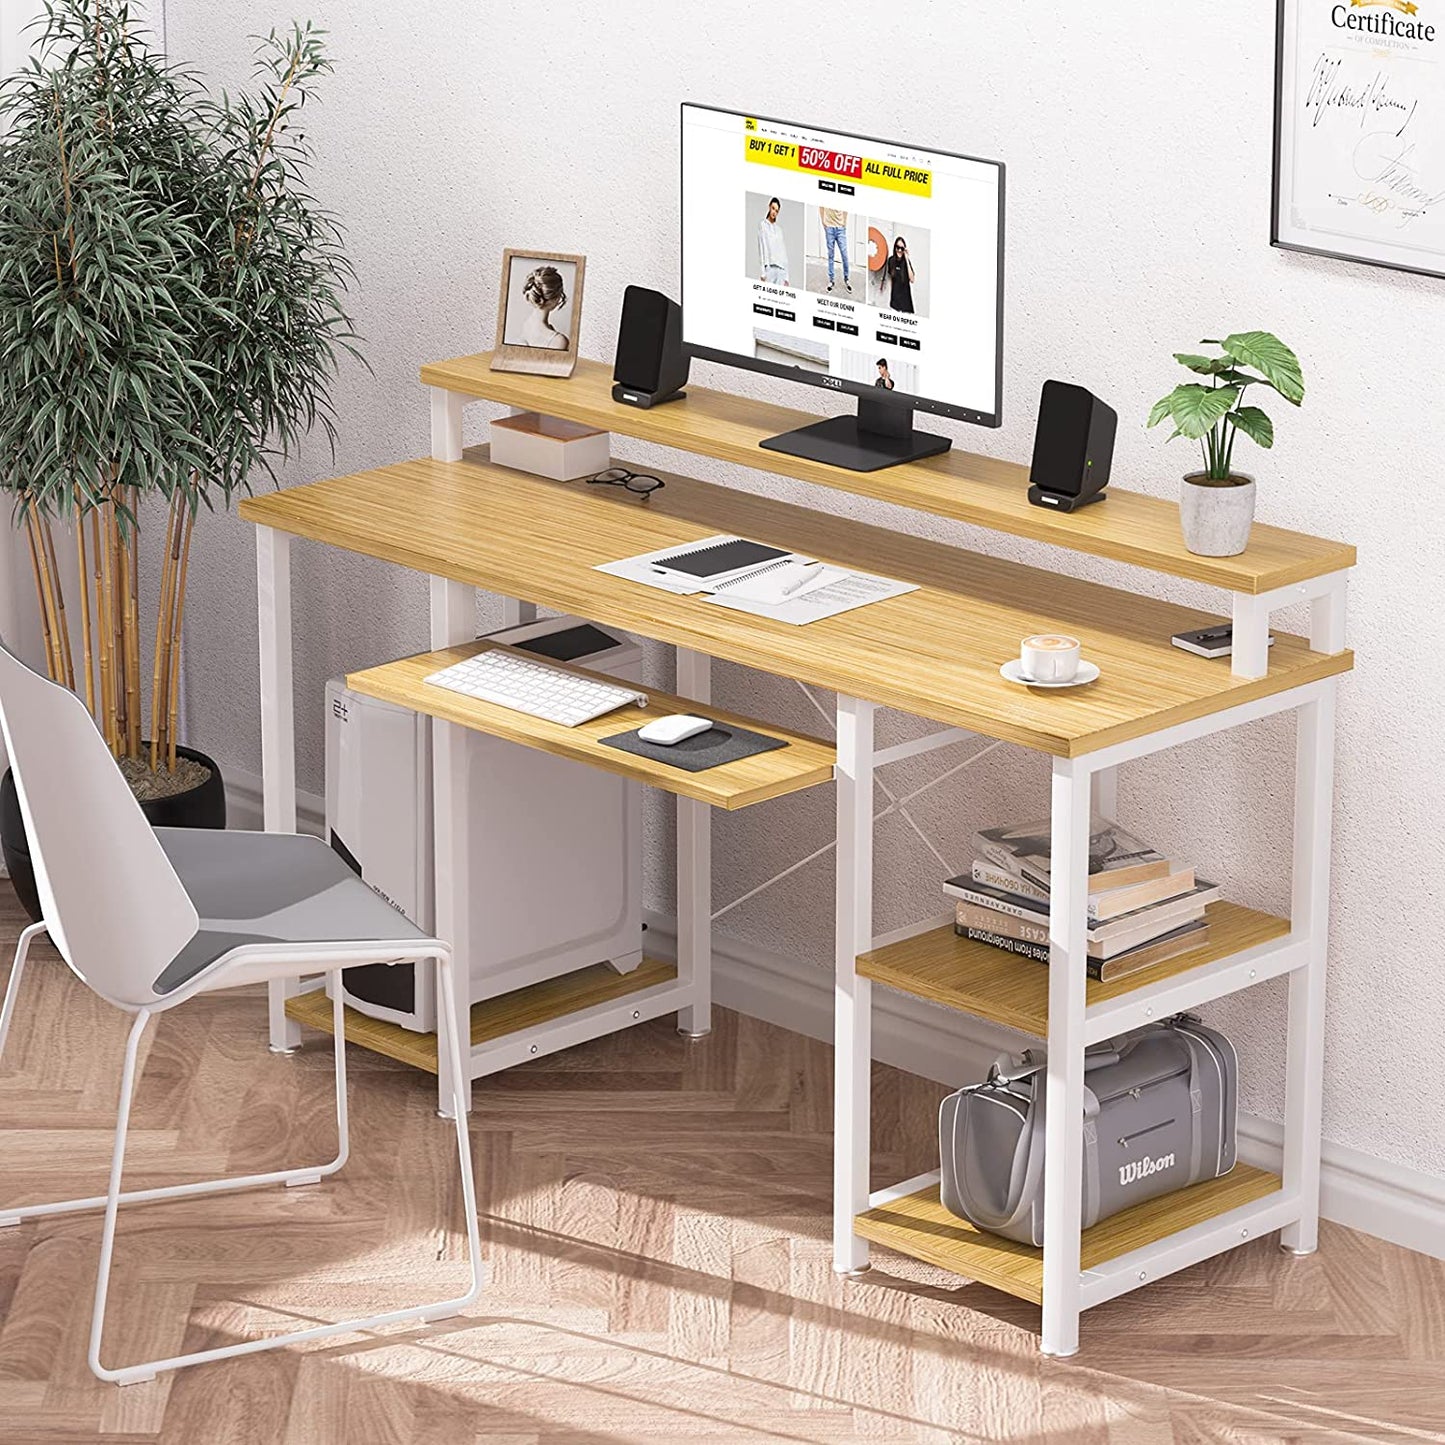 Working and computer table